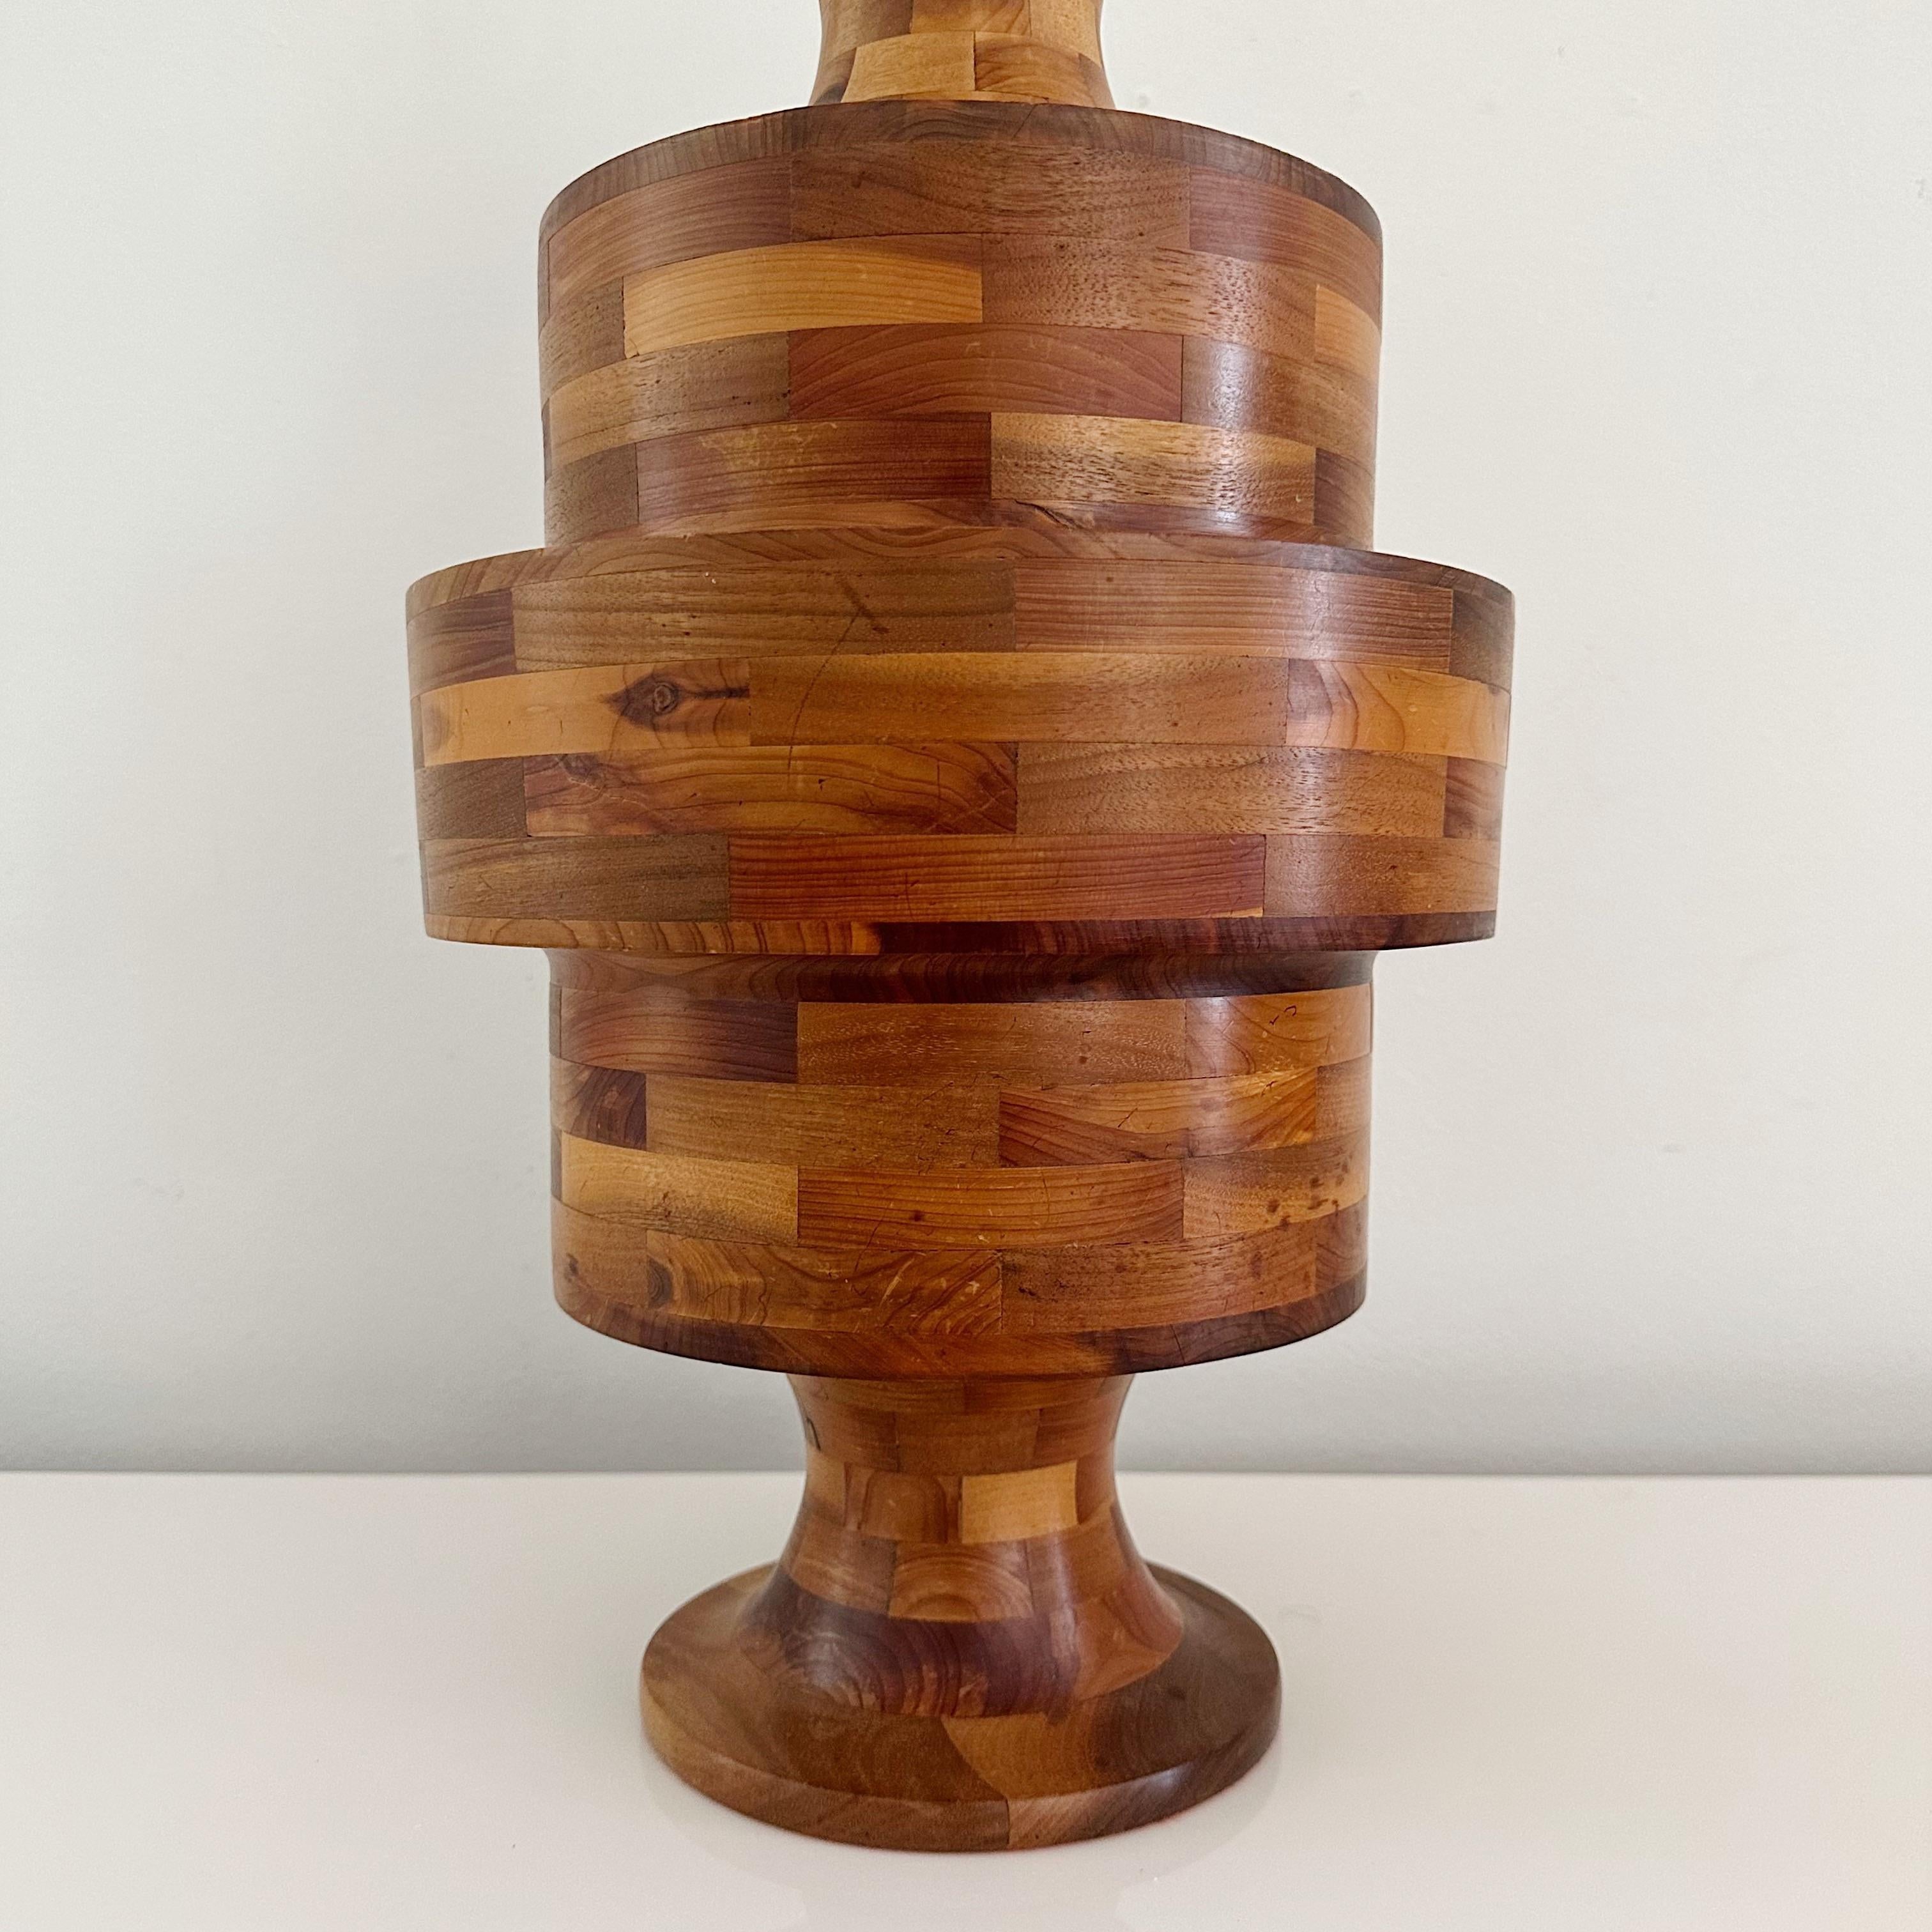 Hand-Crafted Vintage Marquetry Hand-Turned Lathe Block Lamp, Crafted from Various Woods from For Sale